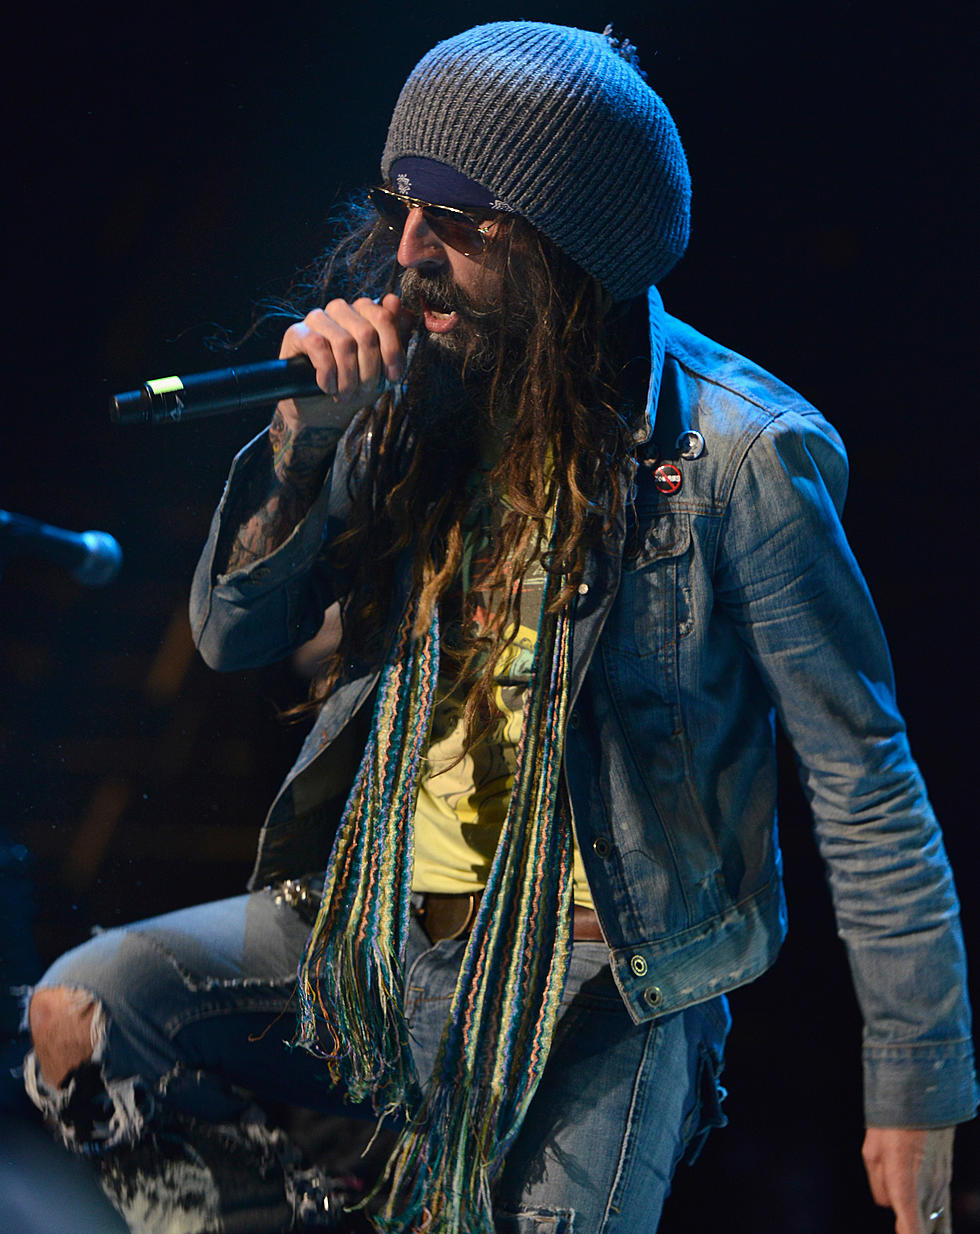 See Rob Zombie Cover “Sweet Dreams” in Manson’s Absense [VIDEO]